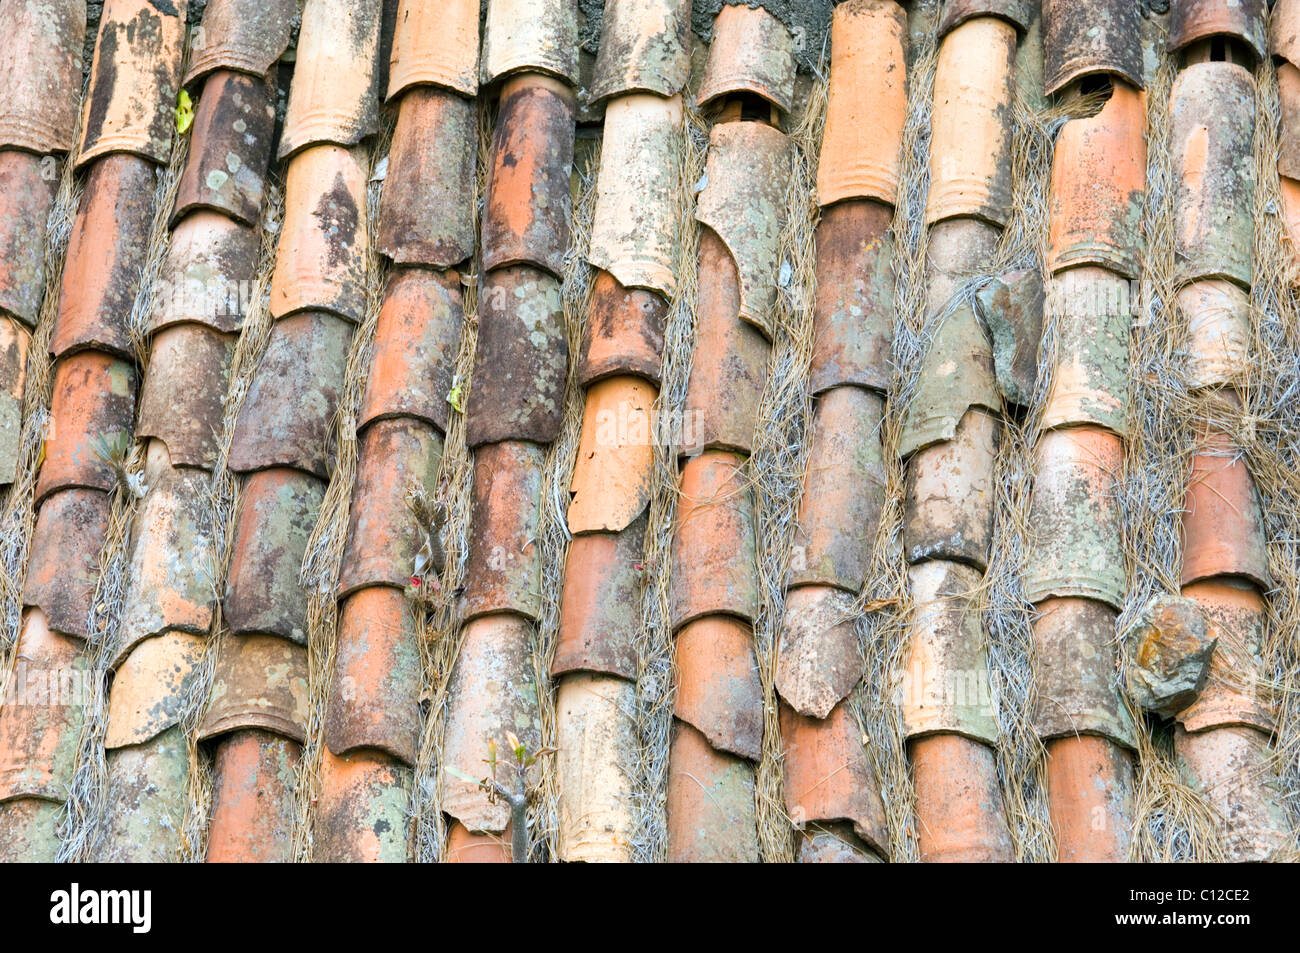 Old ceramic pottery terracotta roof tiles on rural house on La Gomera, Canary Islands, Spain Stock Photo